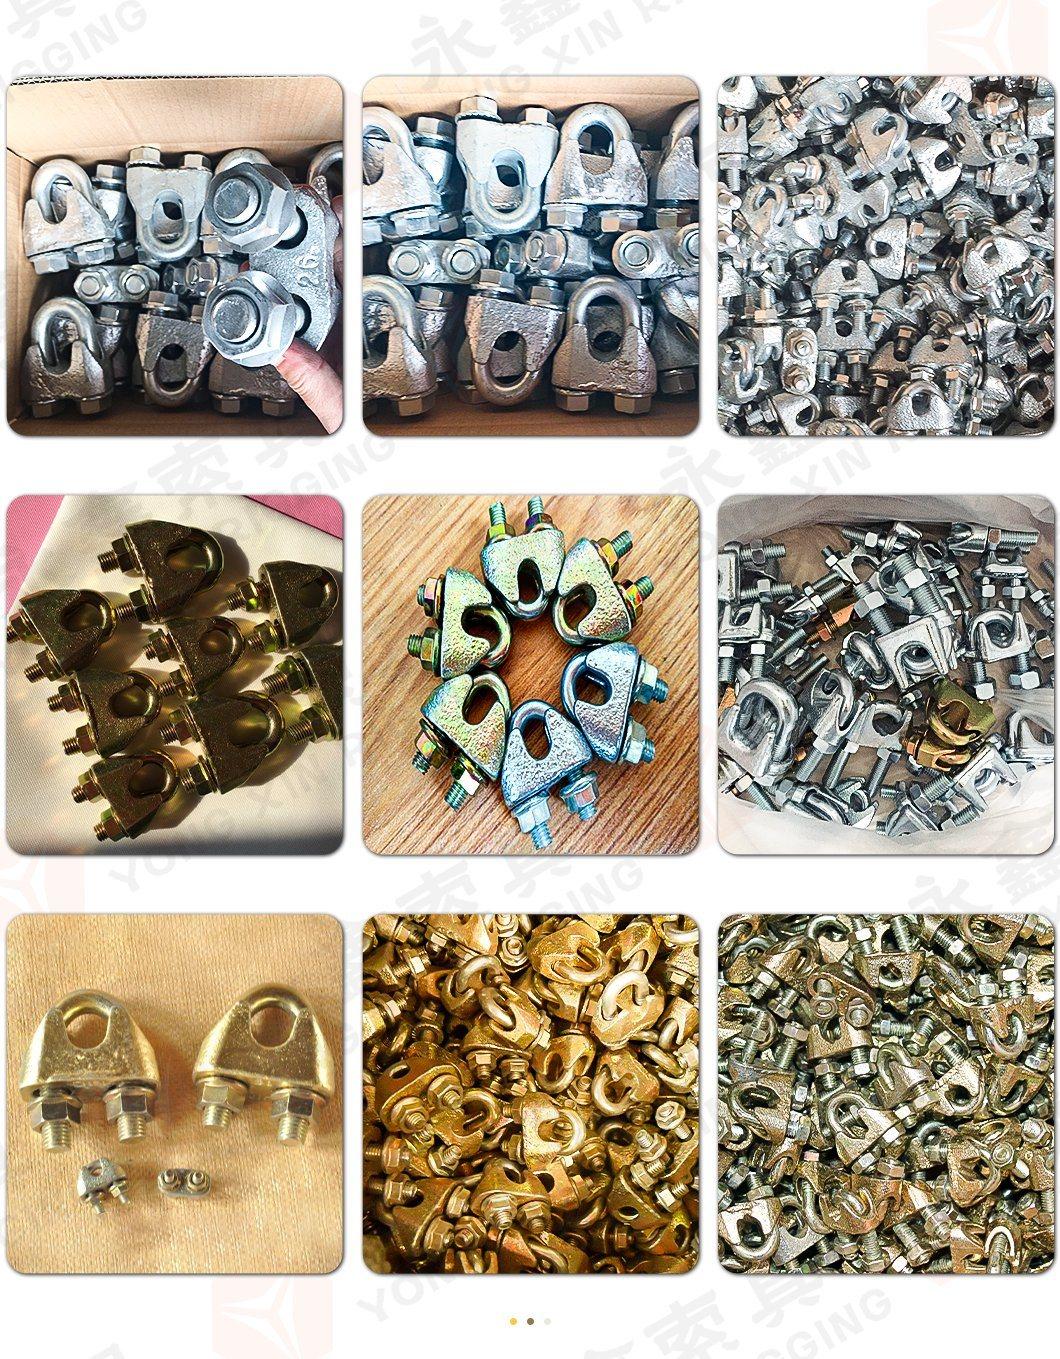 Wholesale High Quality DIN 1142 Galvanized Malleable Wire Rope Clips